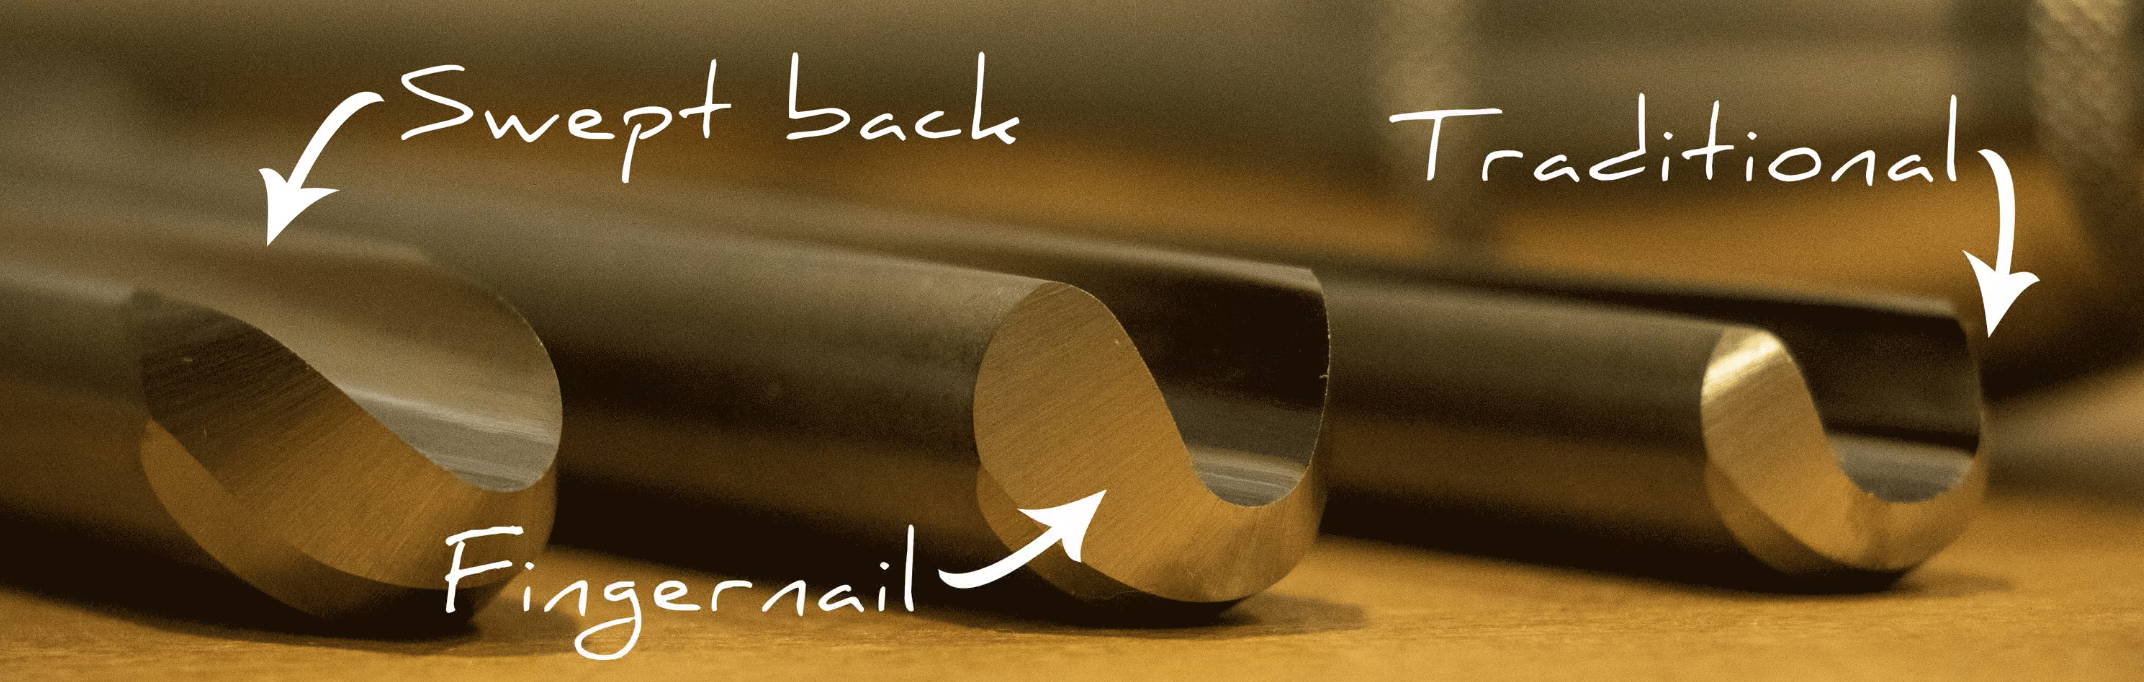 A Quick Guide to Bowl Gouge Grinds and Flutes